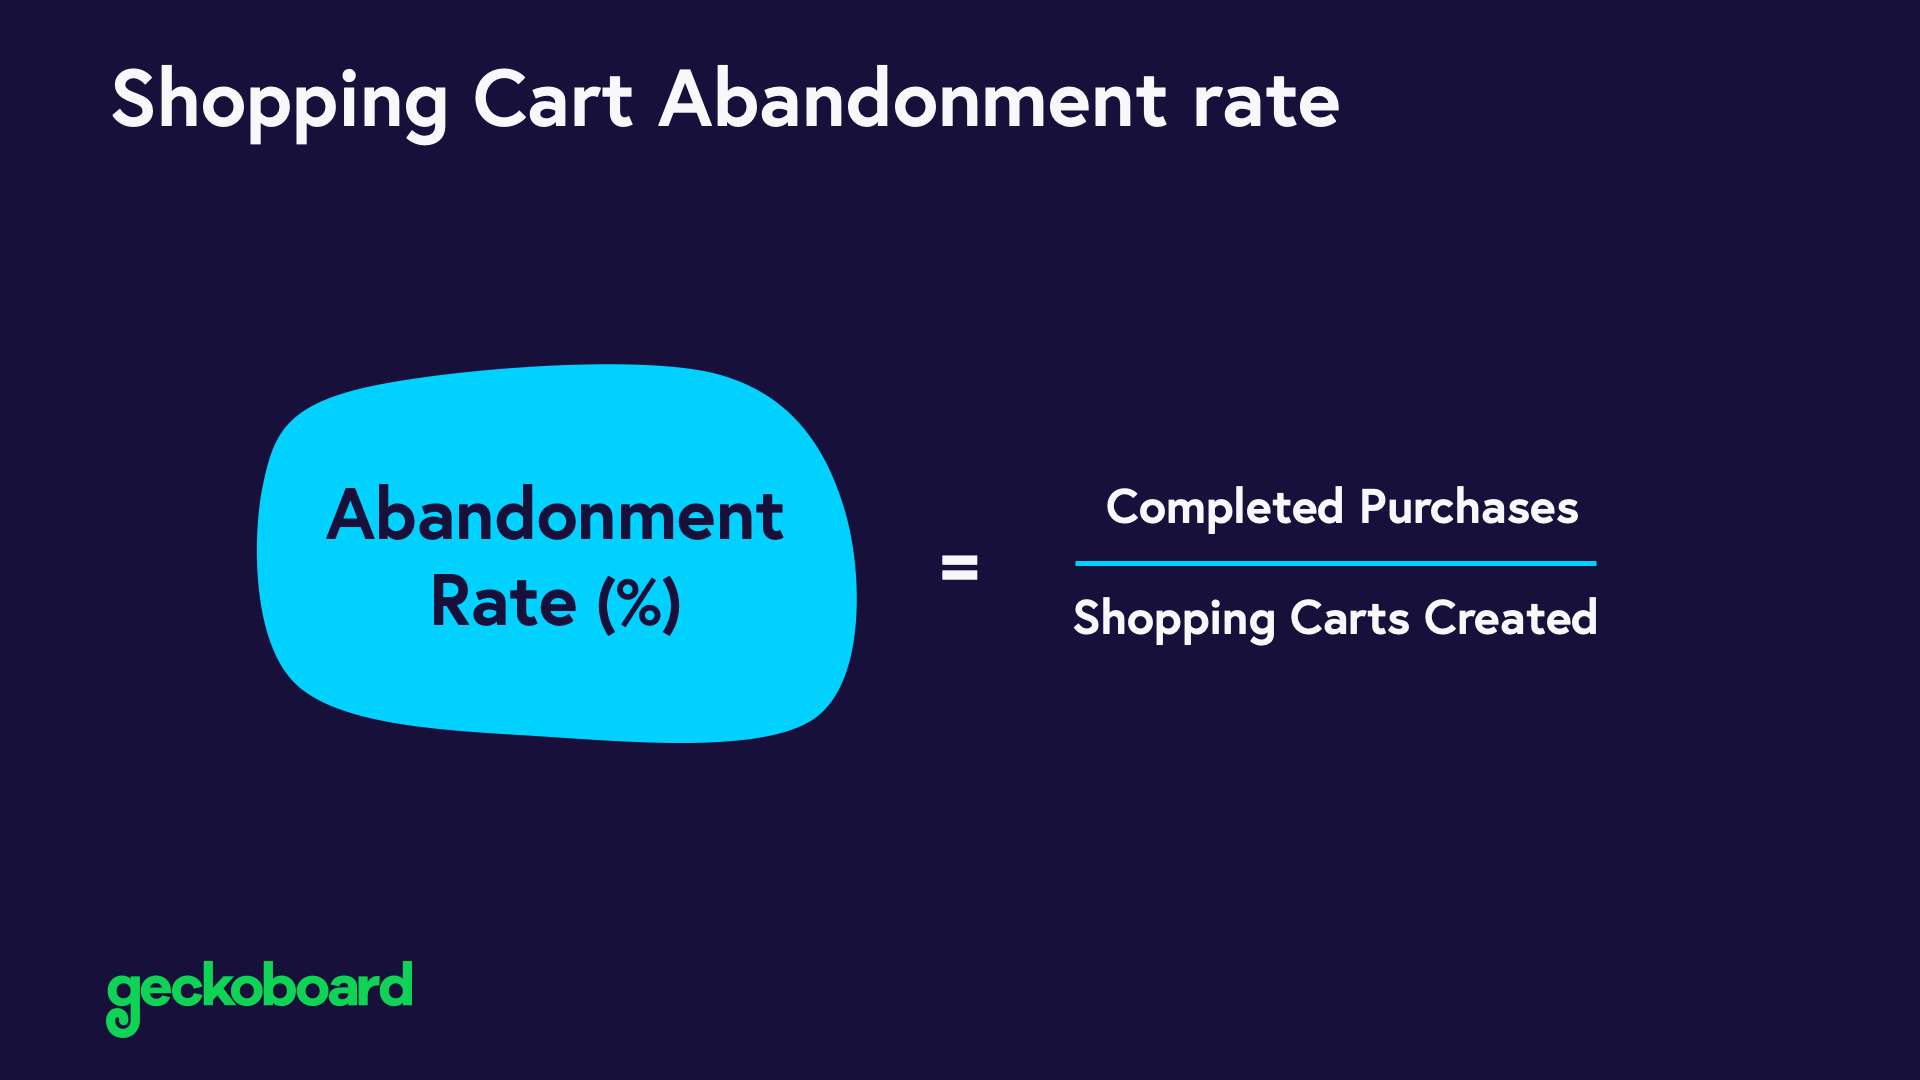 How to calculate Shopping Cart Abandonment Rate